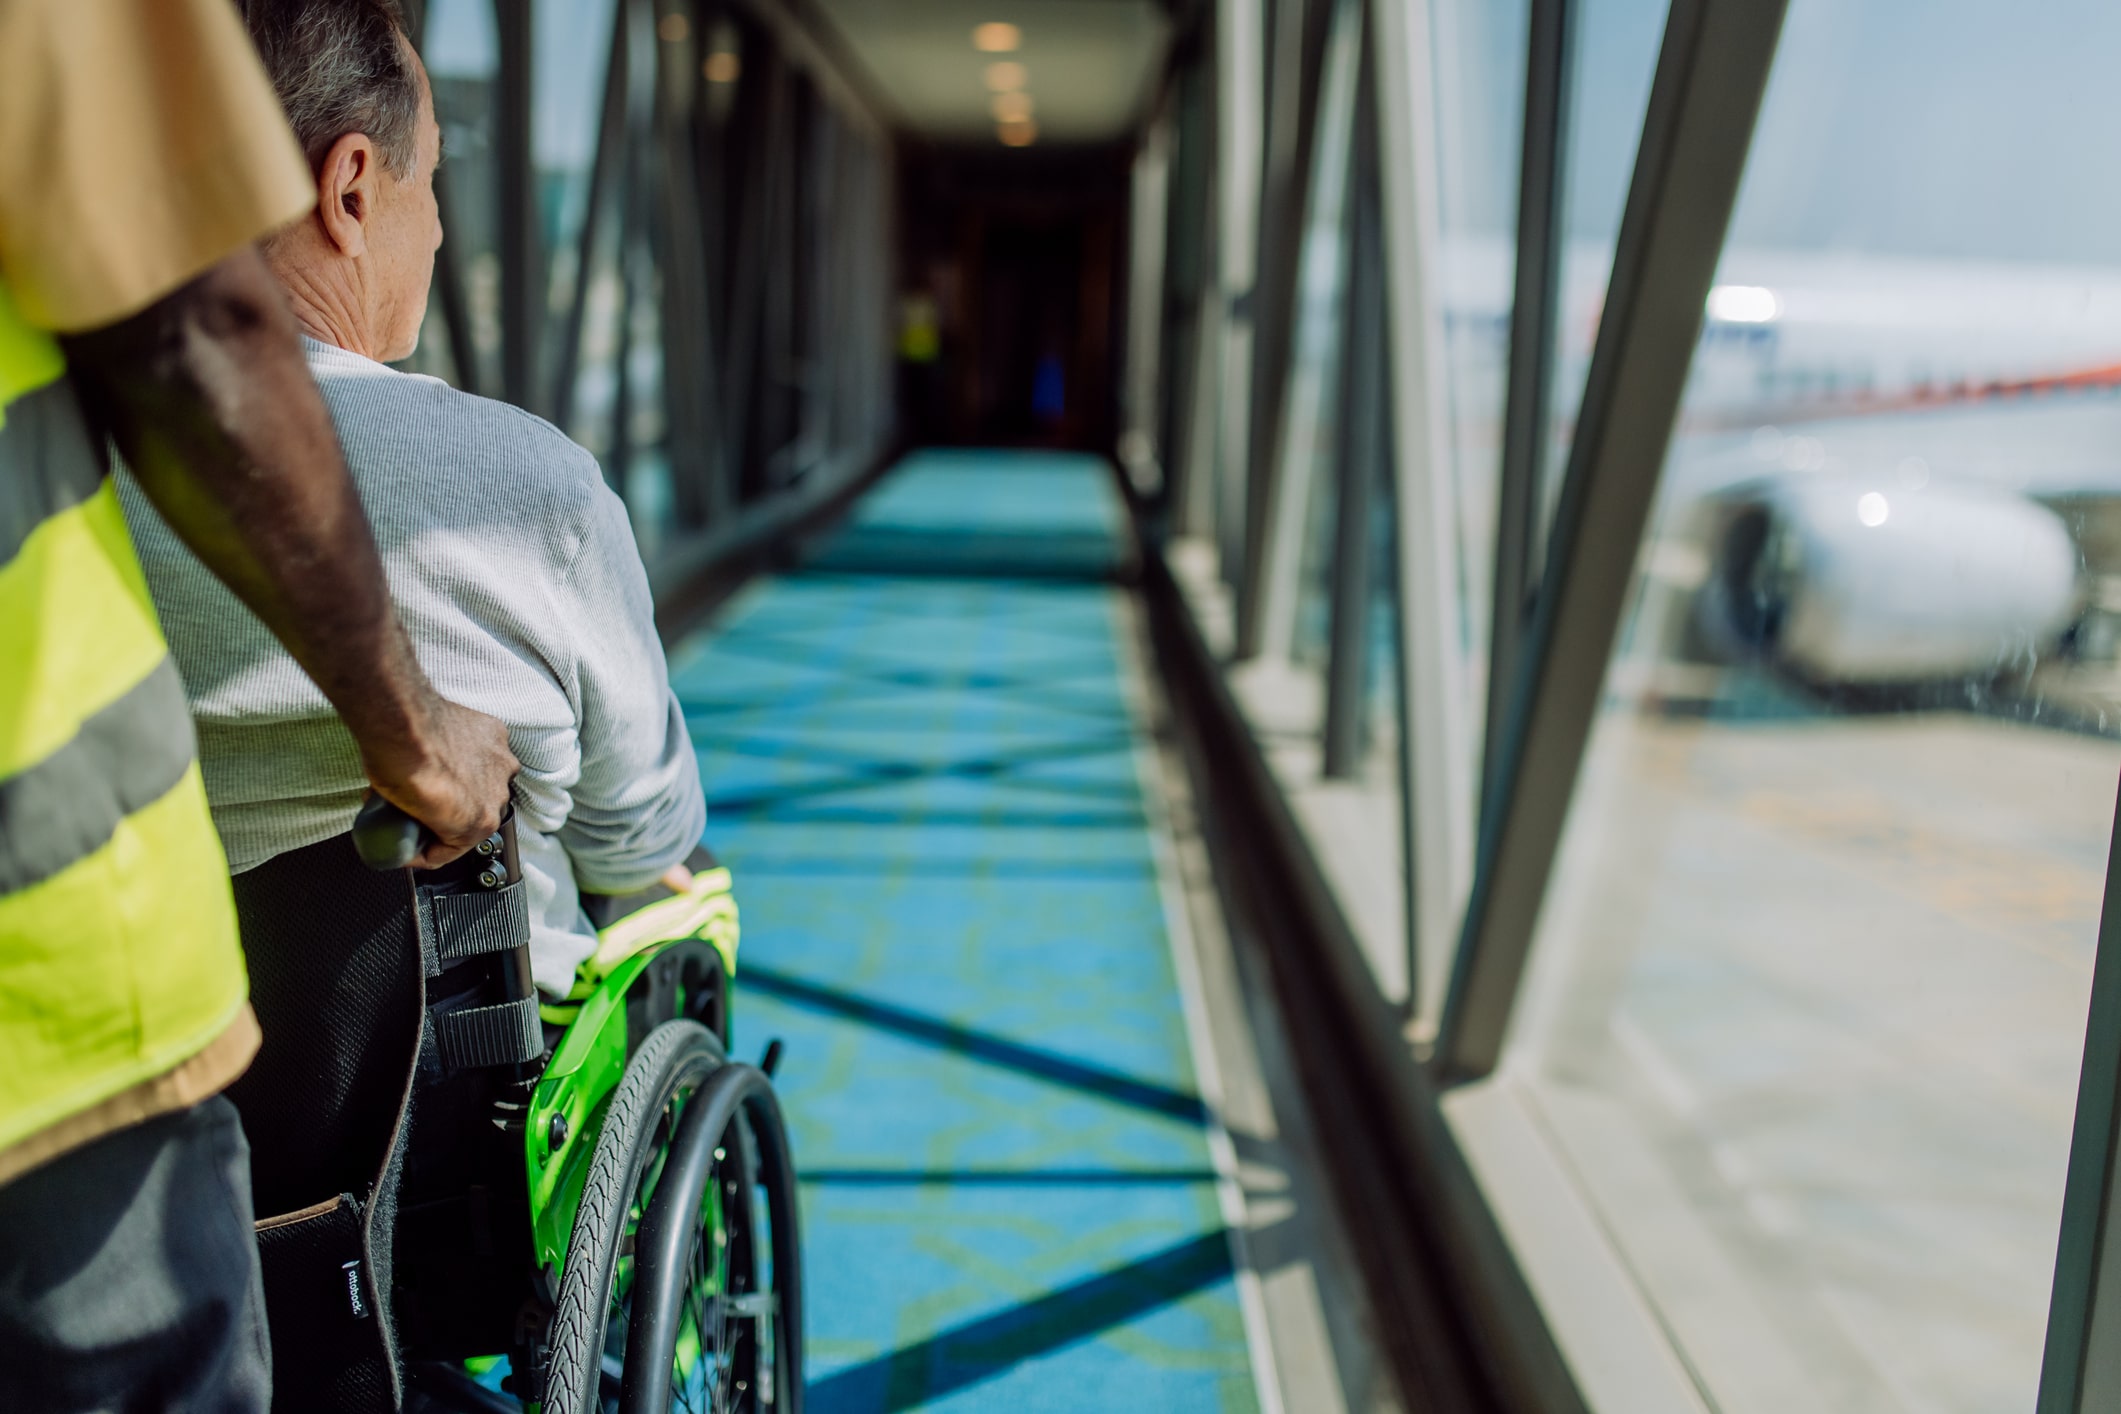 A person in a wheelchair is being assisted by an airport staff member along a glass-walled corridor leading to an airplane. The corridor has blue flooring with sunlight streaming through the windows creating patterns. An airplane is visible through the windows.